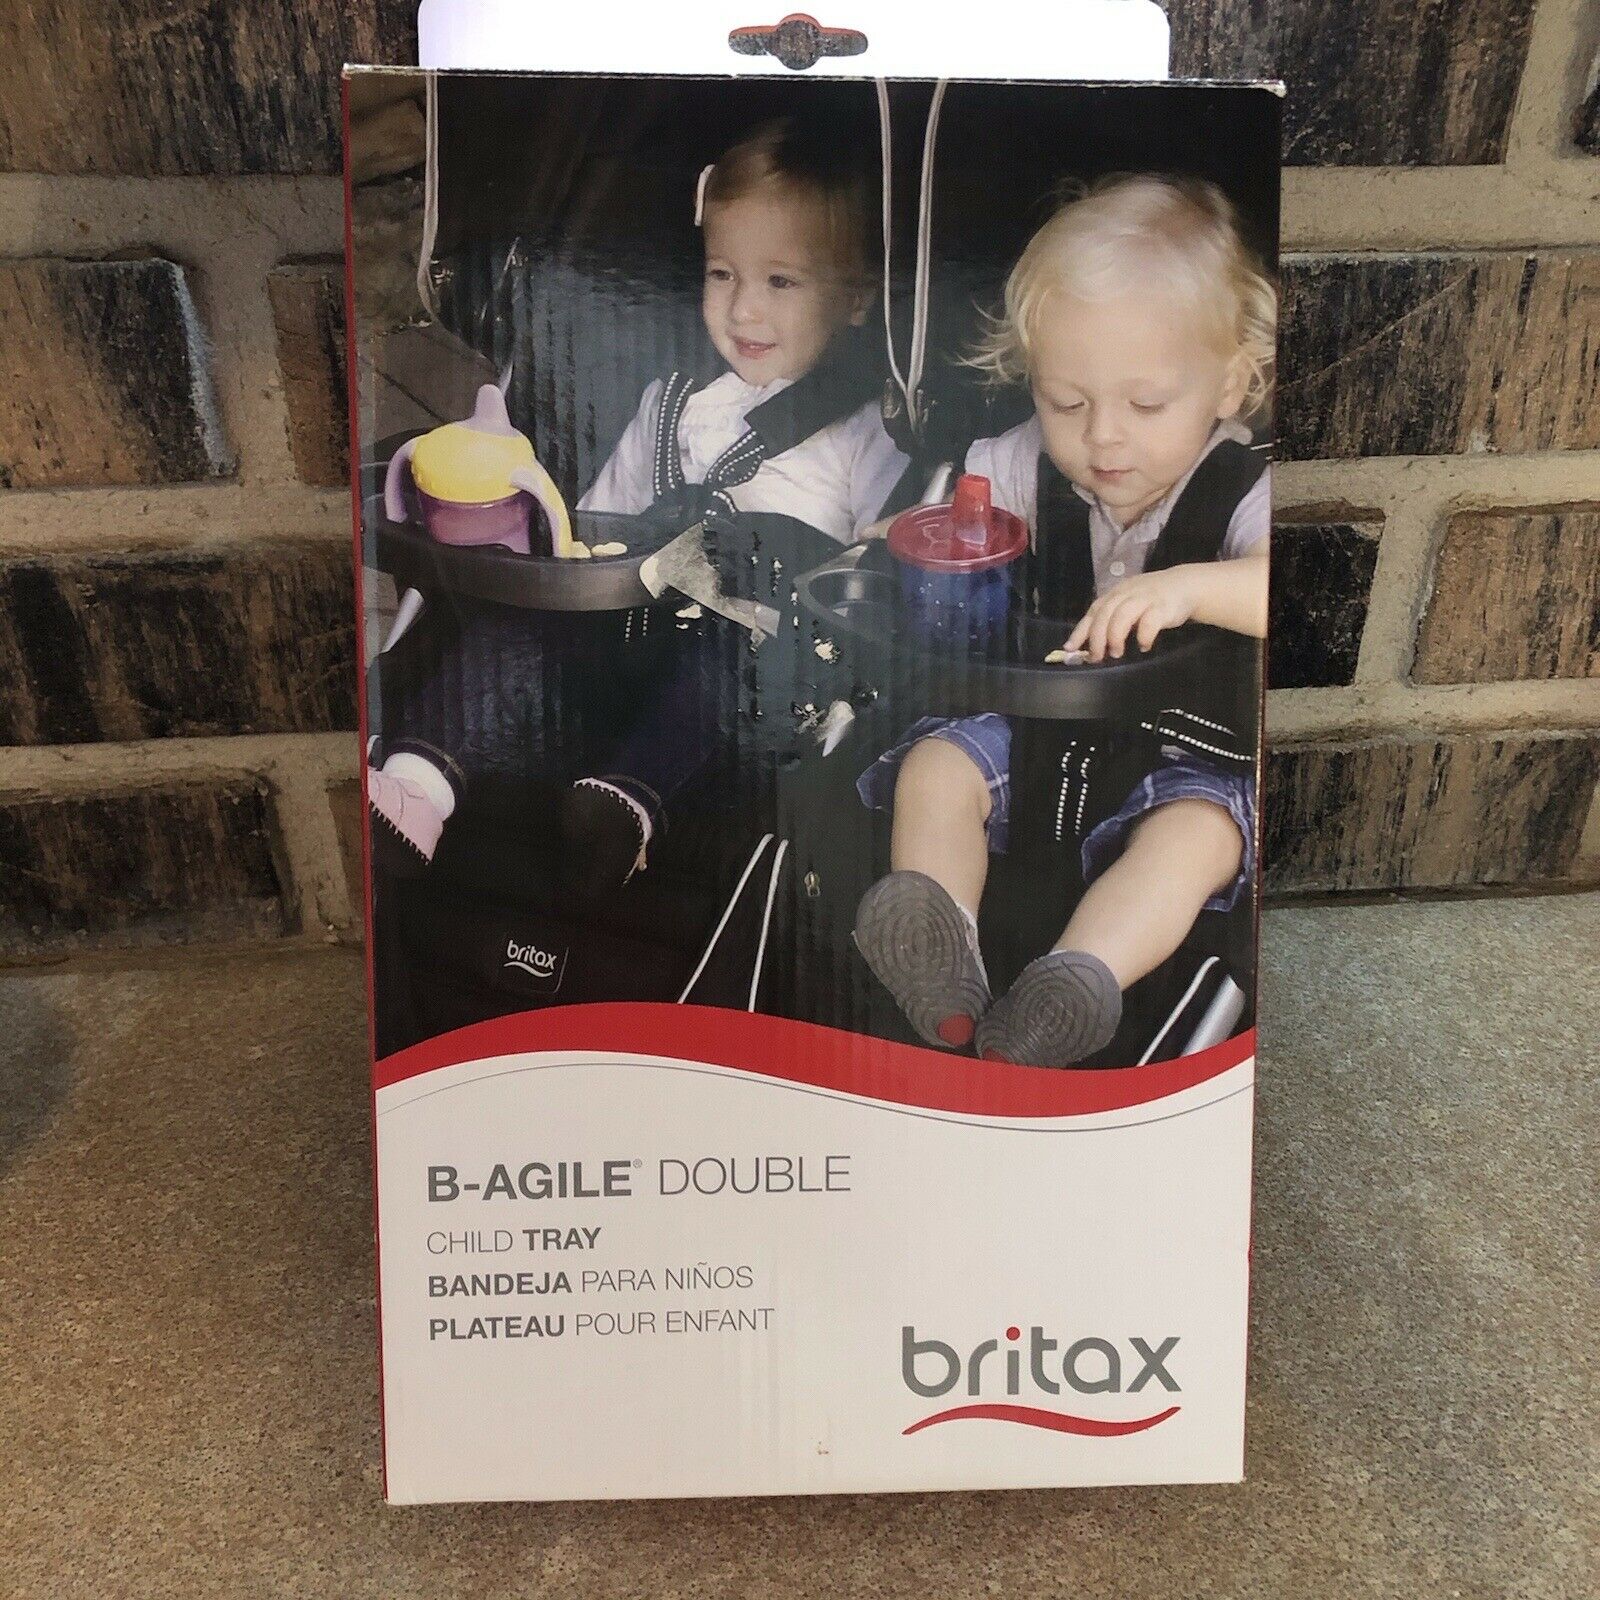 Britax Child Tray For B-agile Double Strollers, Black Open Box